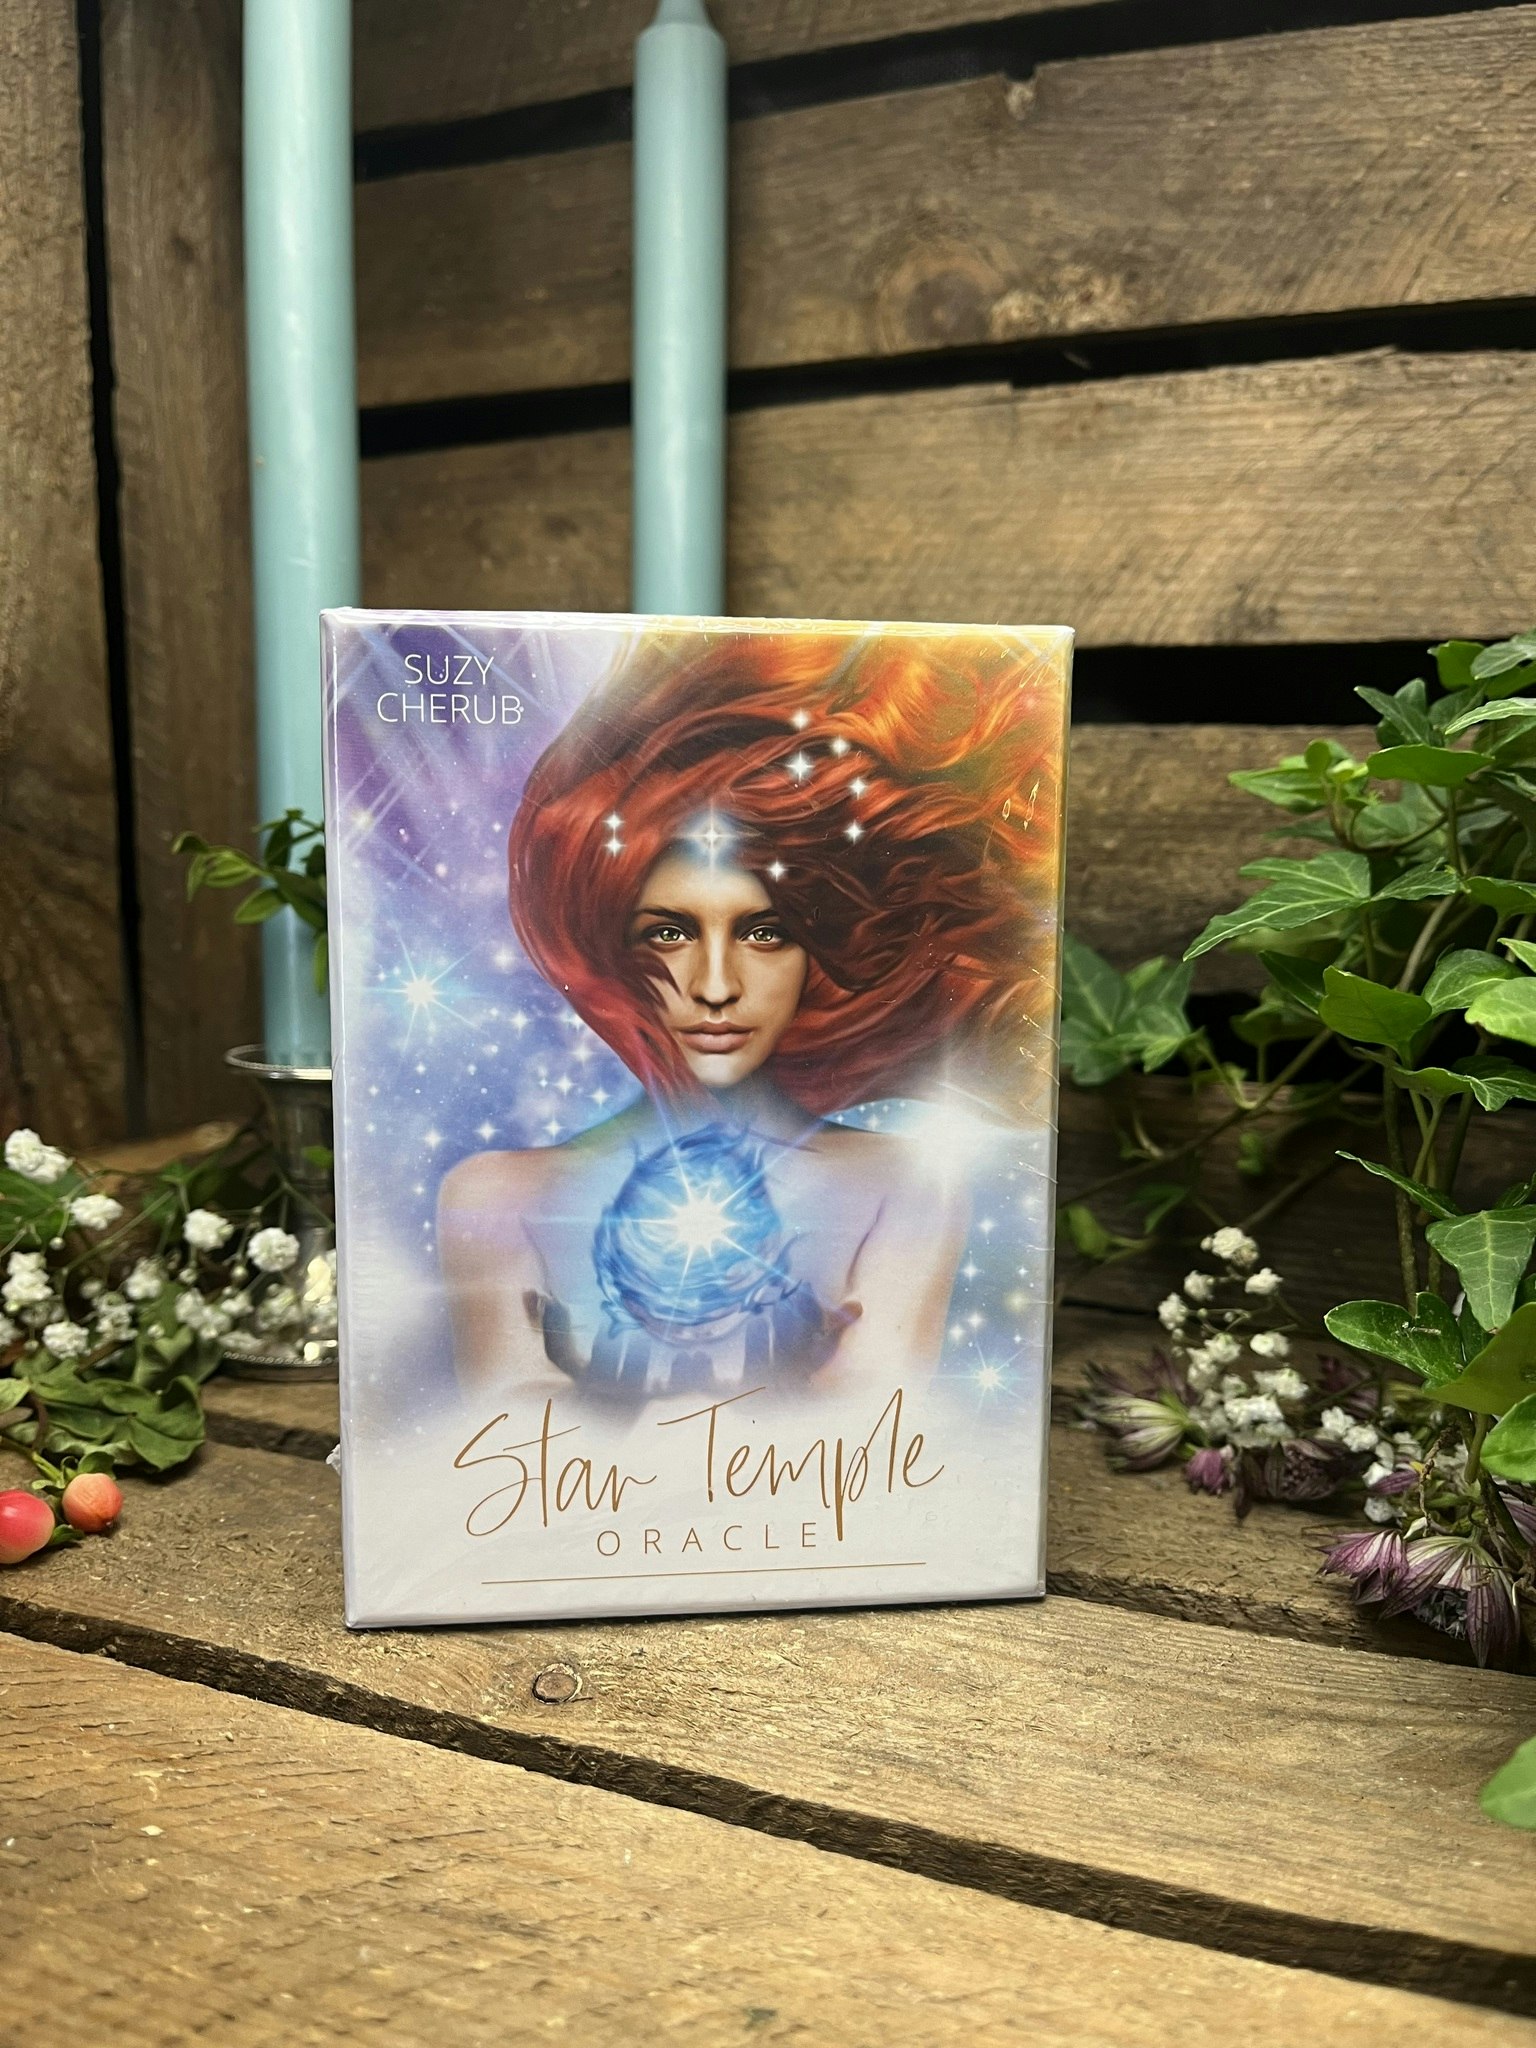 Star temple oracle